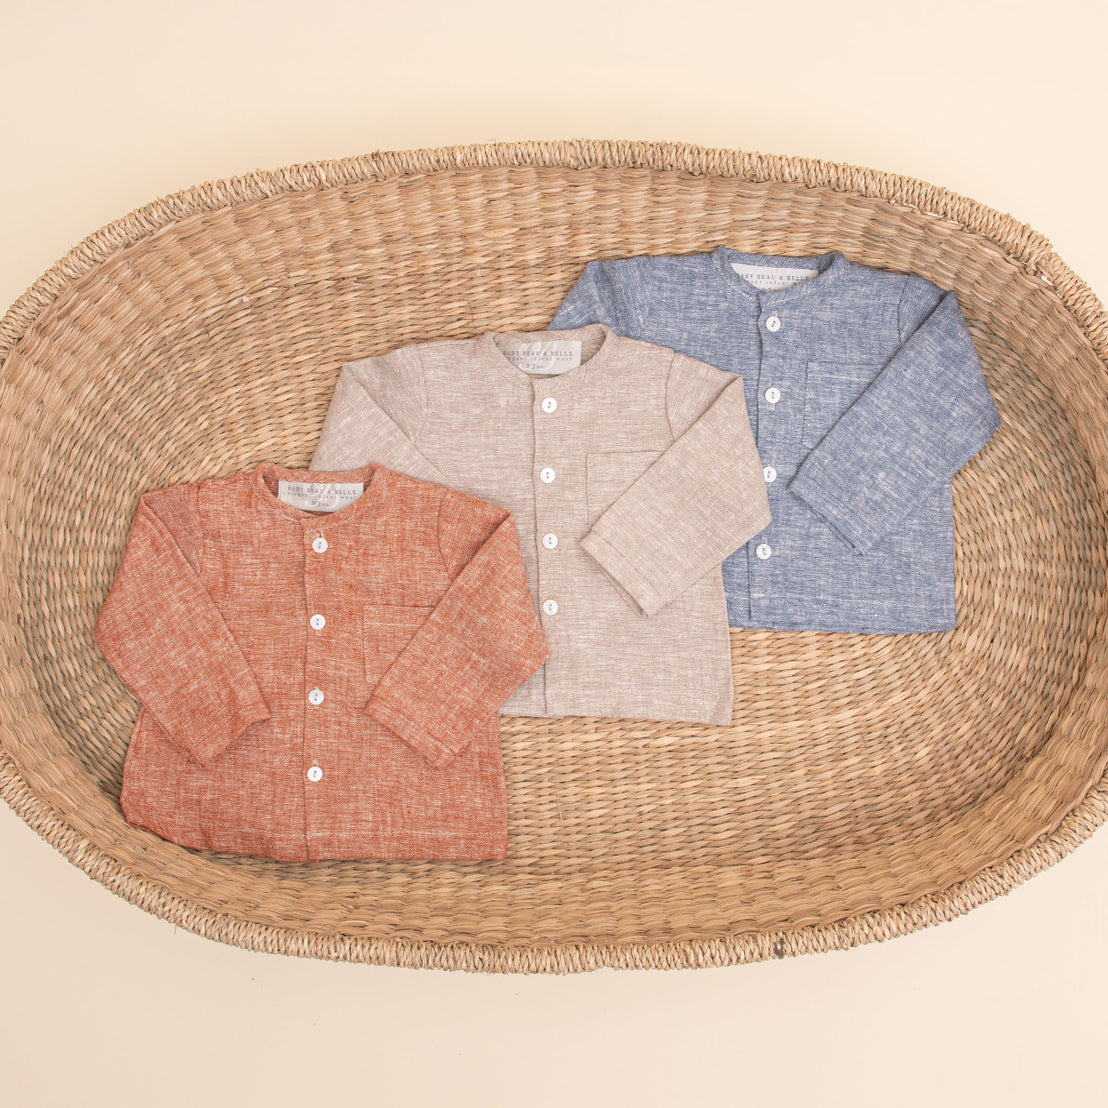 Flat lay photo of all three colors of the Silas Linen Shirt. The collarless shirt is a made from linen in three different colors: indigo, sand, and clay.